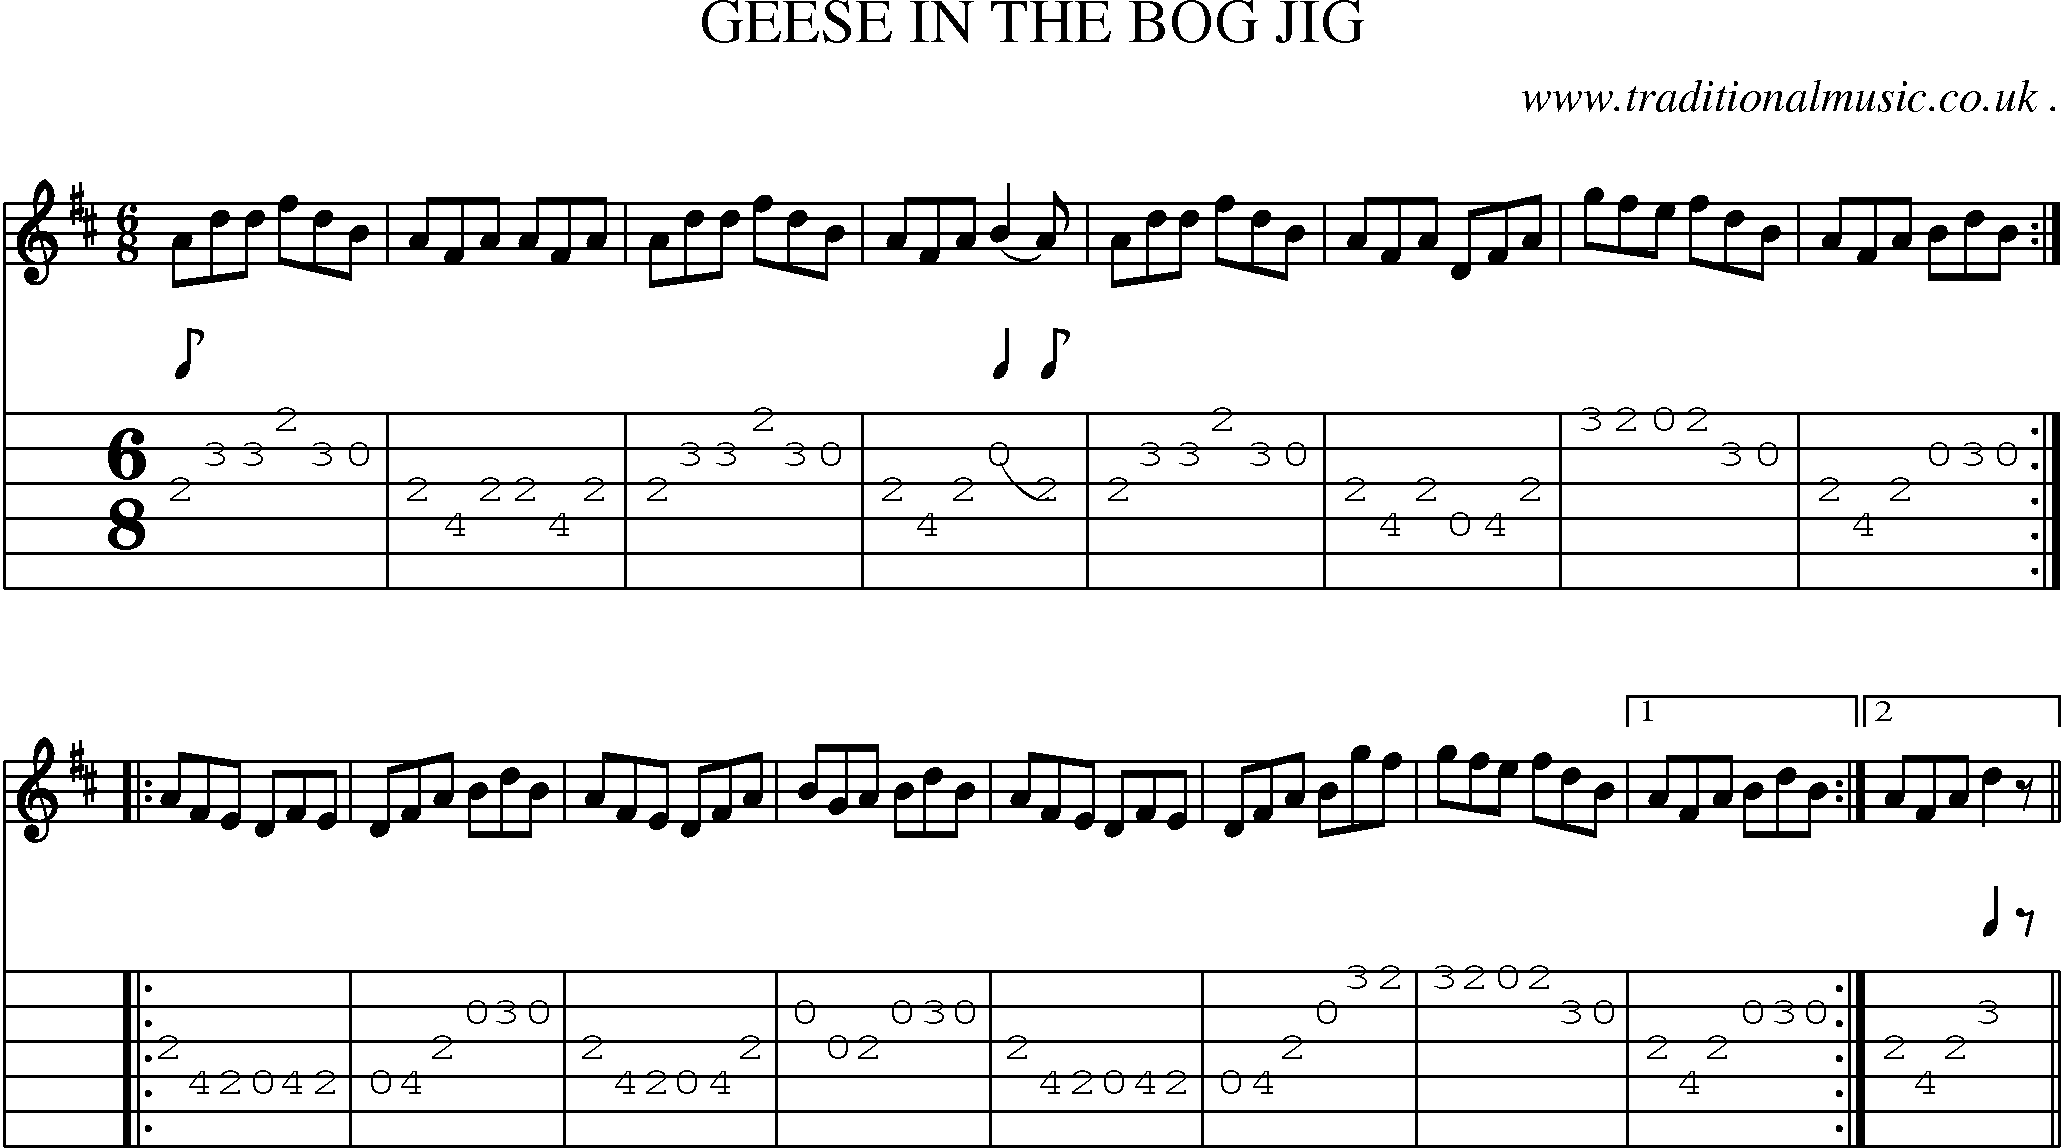 Sheet-Music and Guitar Tabs for Geese In The Bog Jig